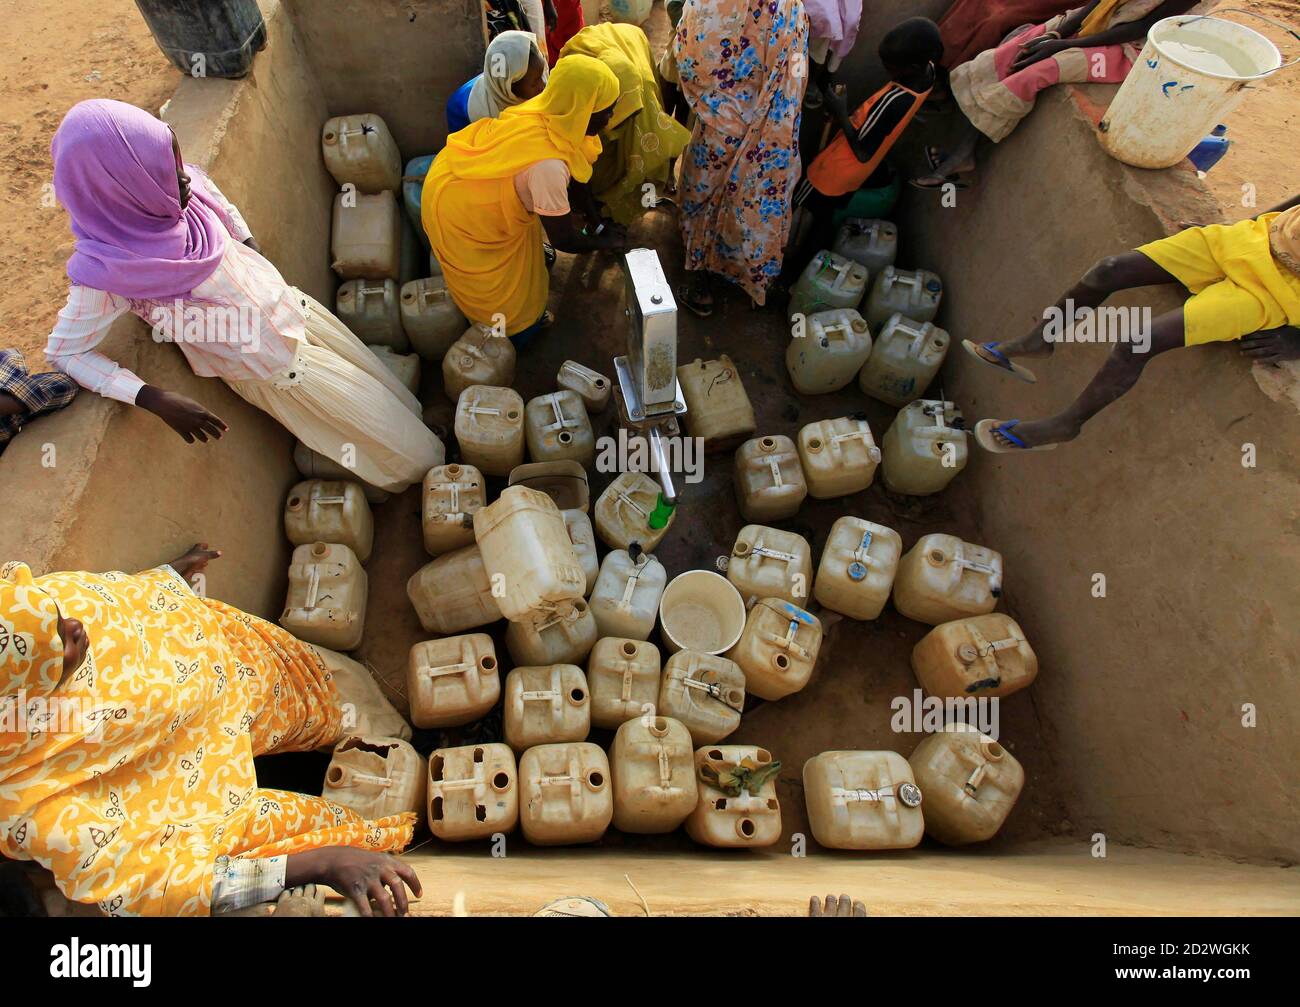 Displaced Sudanese women fill their containers at a water point in the Abu Shouk IDP (internally displaced persons) camp at Al Fasher, northern Darfur April 8, 2010. REUTERS/Zohra Bensemra (SUDAN - Tags: SOCIETY) Stock Photo